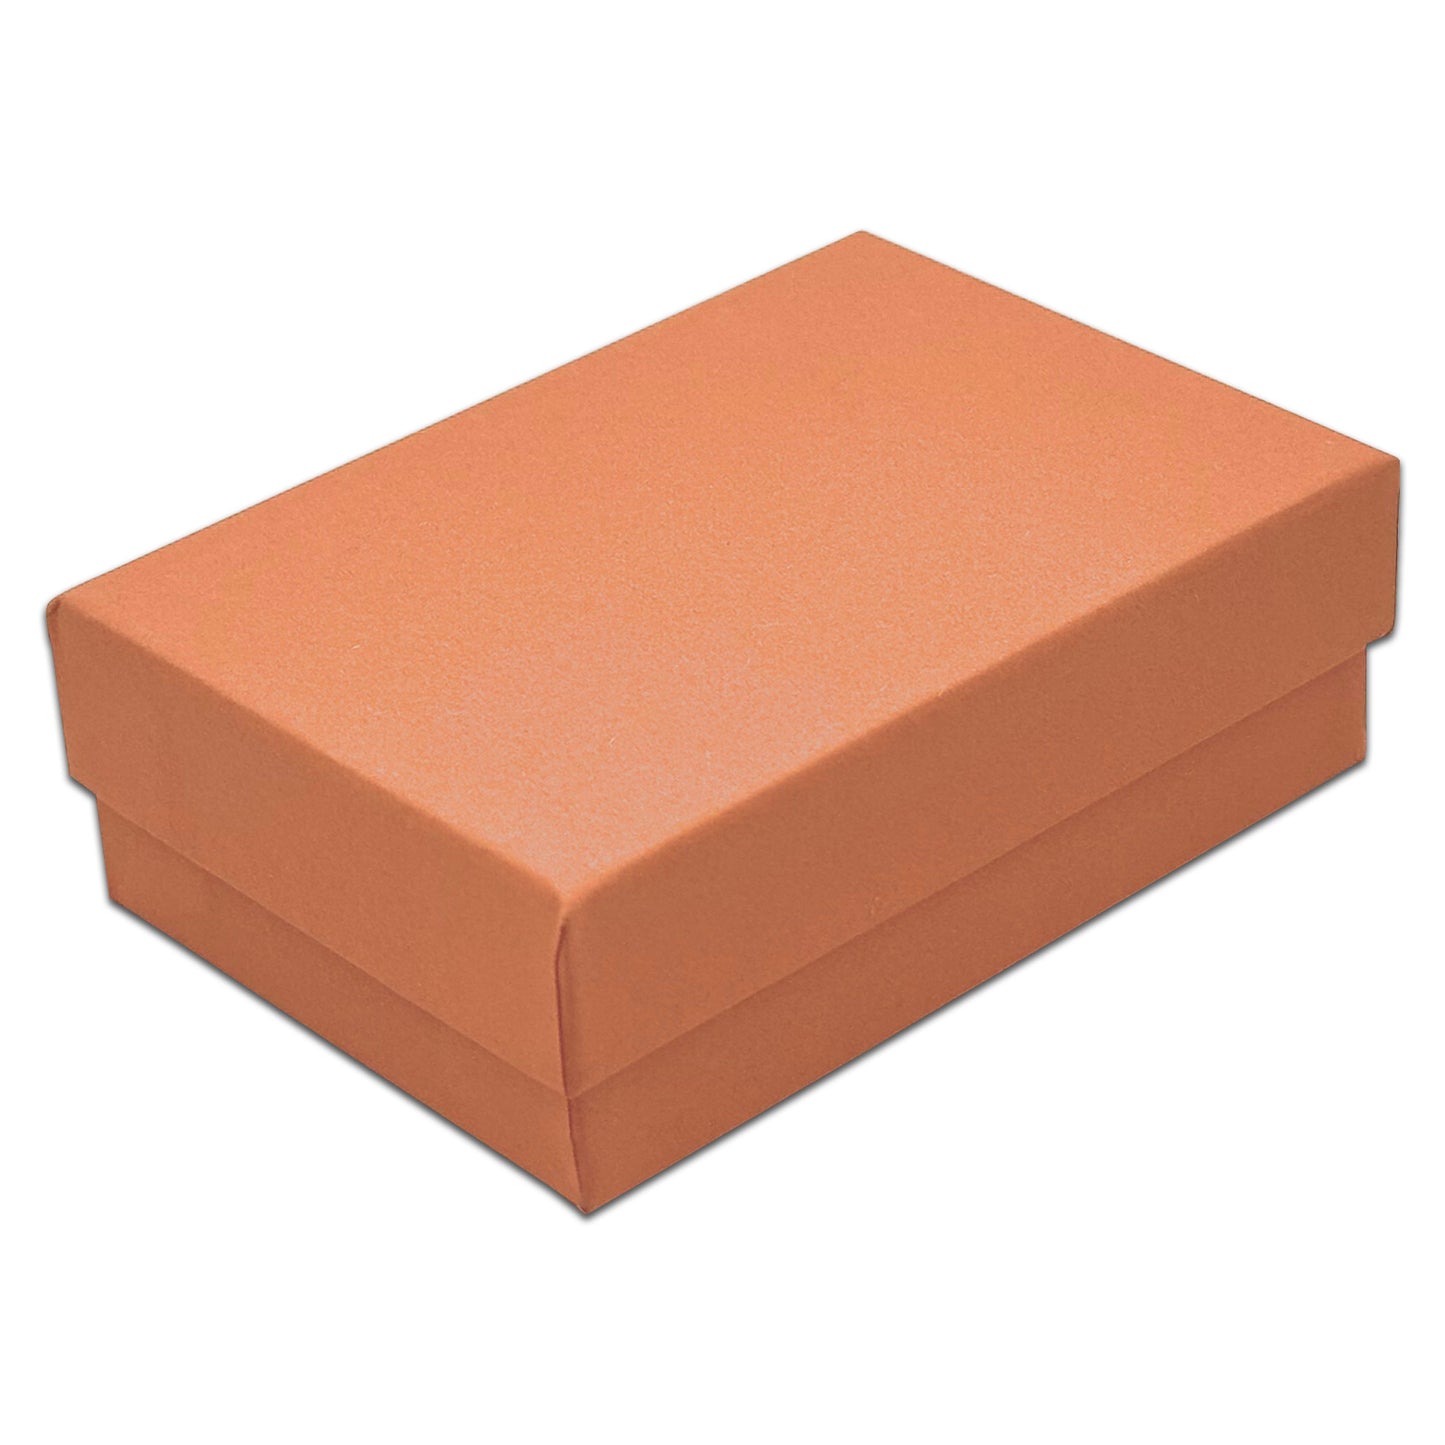 3 1/4" x 2 1/4" x 1" Coral Cotton Filled Paper Box